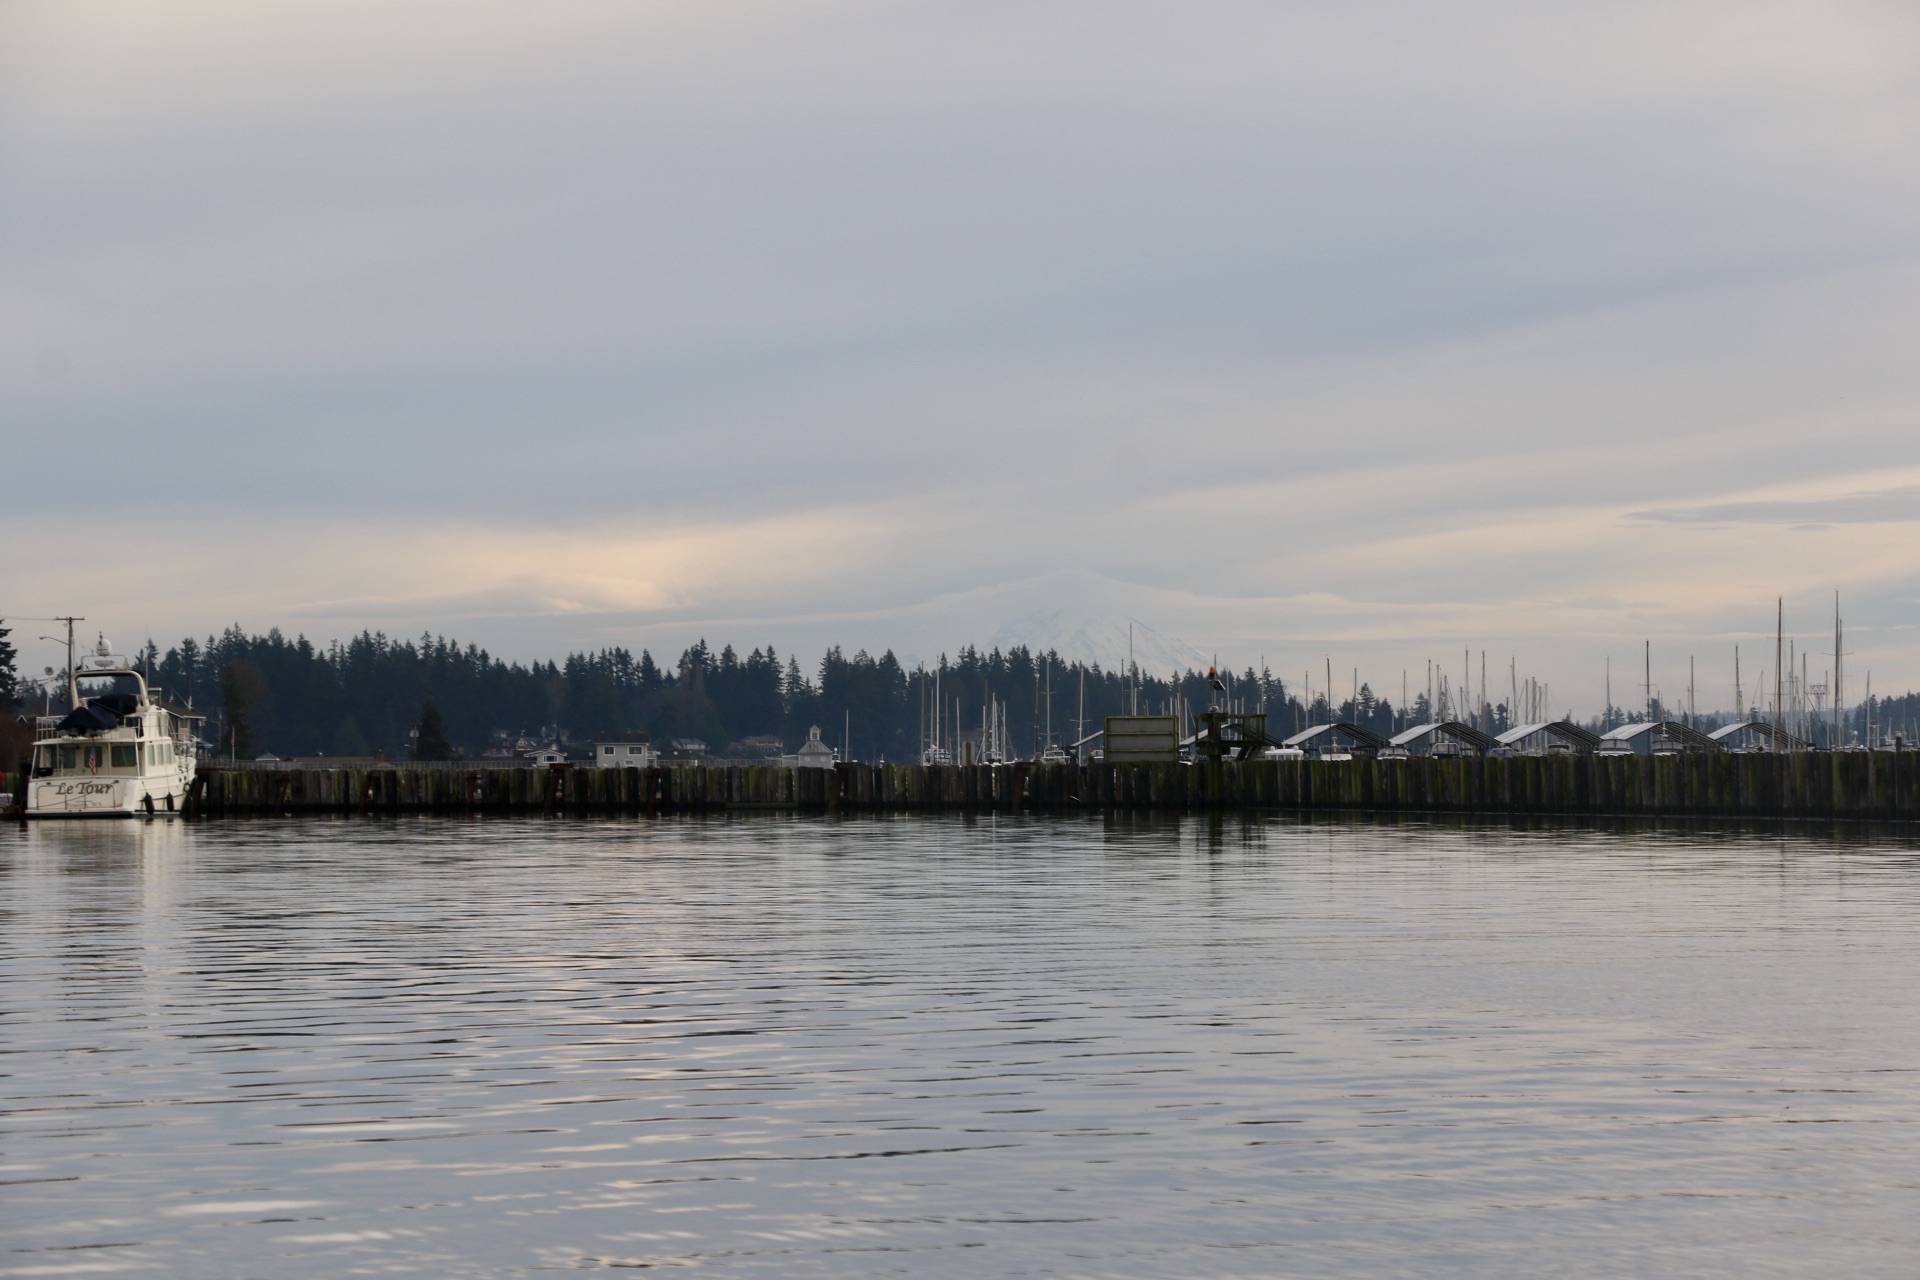 The Port of Poulsbo's breakwater encircles much of the Poulsbo marina. KPark/NKH